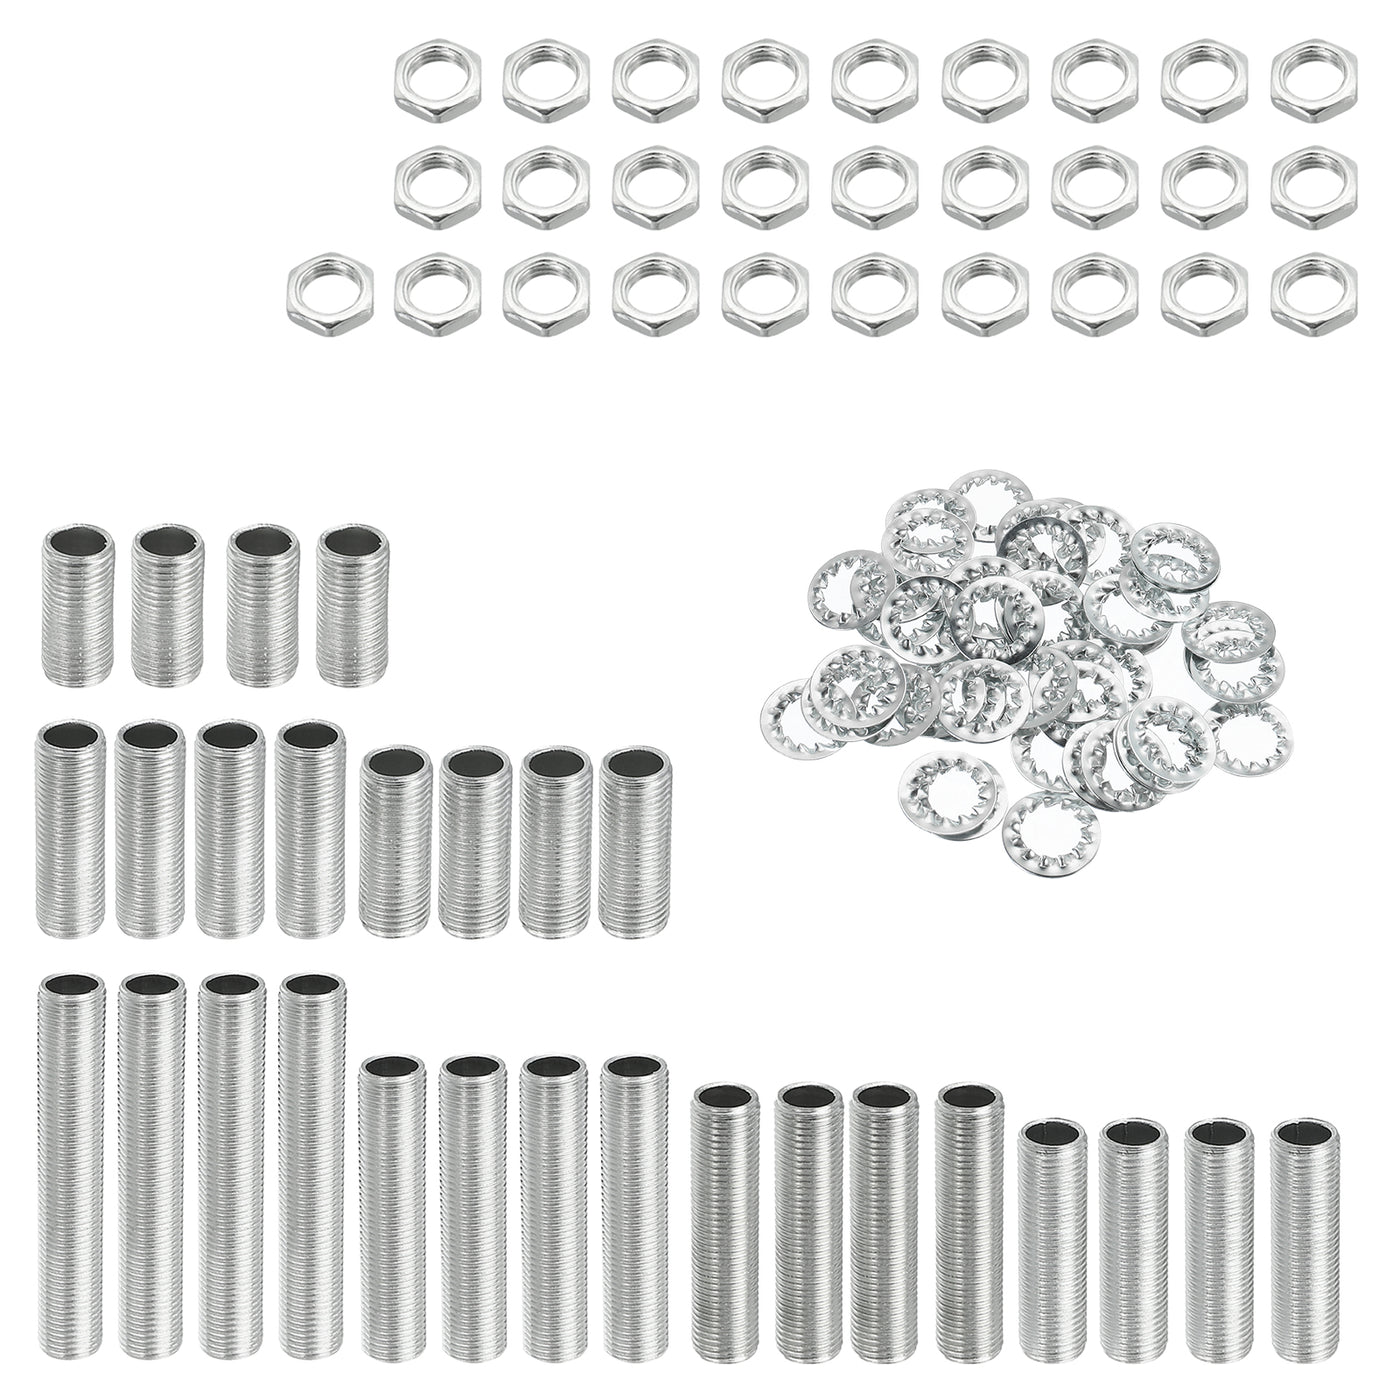 Harfington Lamp Pipe Kit with Lock Nuts Teeth Washers M10 Thread Fasteners Assortment for Chandelier Ceiling Light Repair Assembly DIY Hardware, Pack of 84